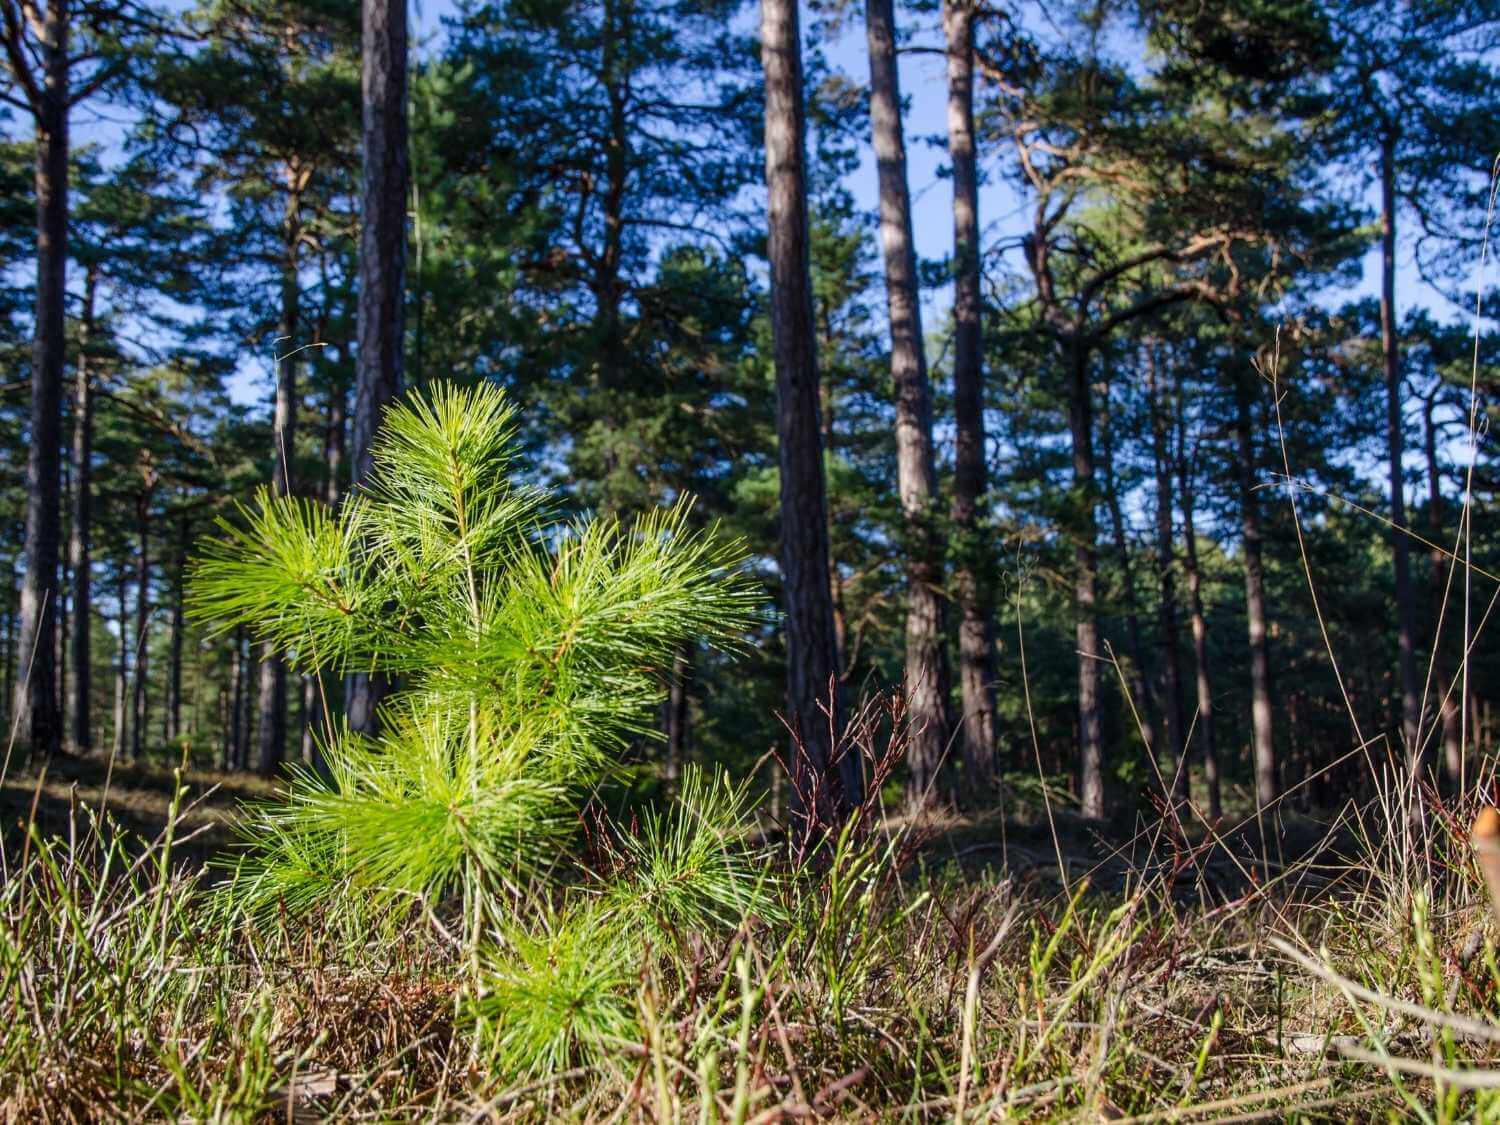 New pine saplings - planted in a forest